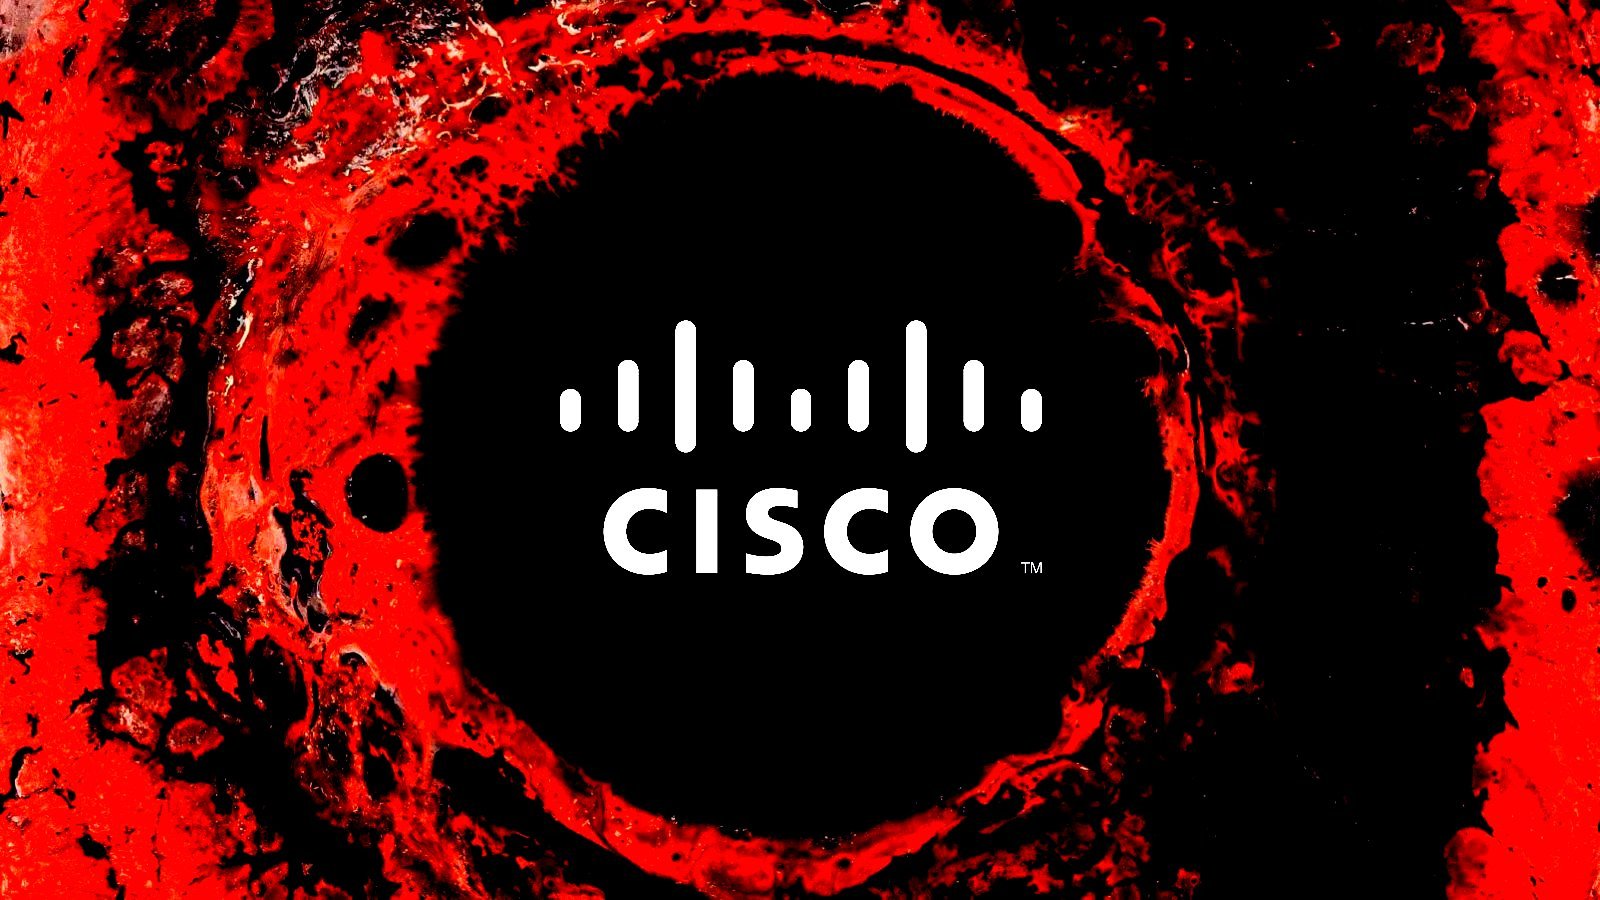 US and Japan warn of Chinese hackers backdooring Cisco routers – Source: www.bleepingcomputer.com